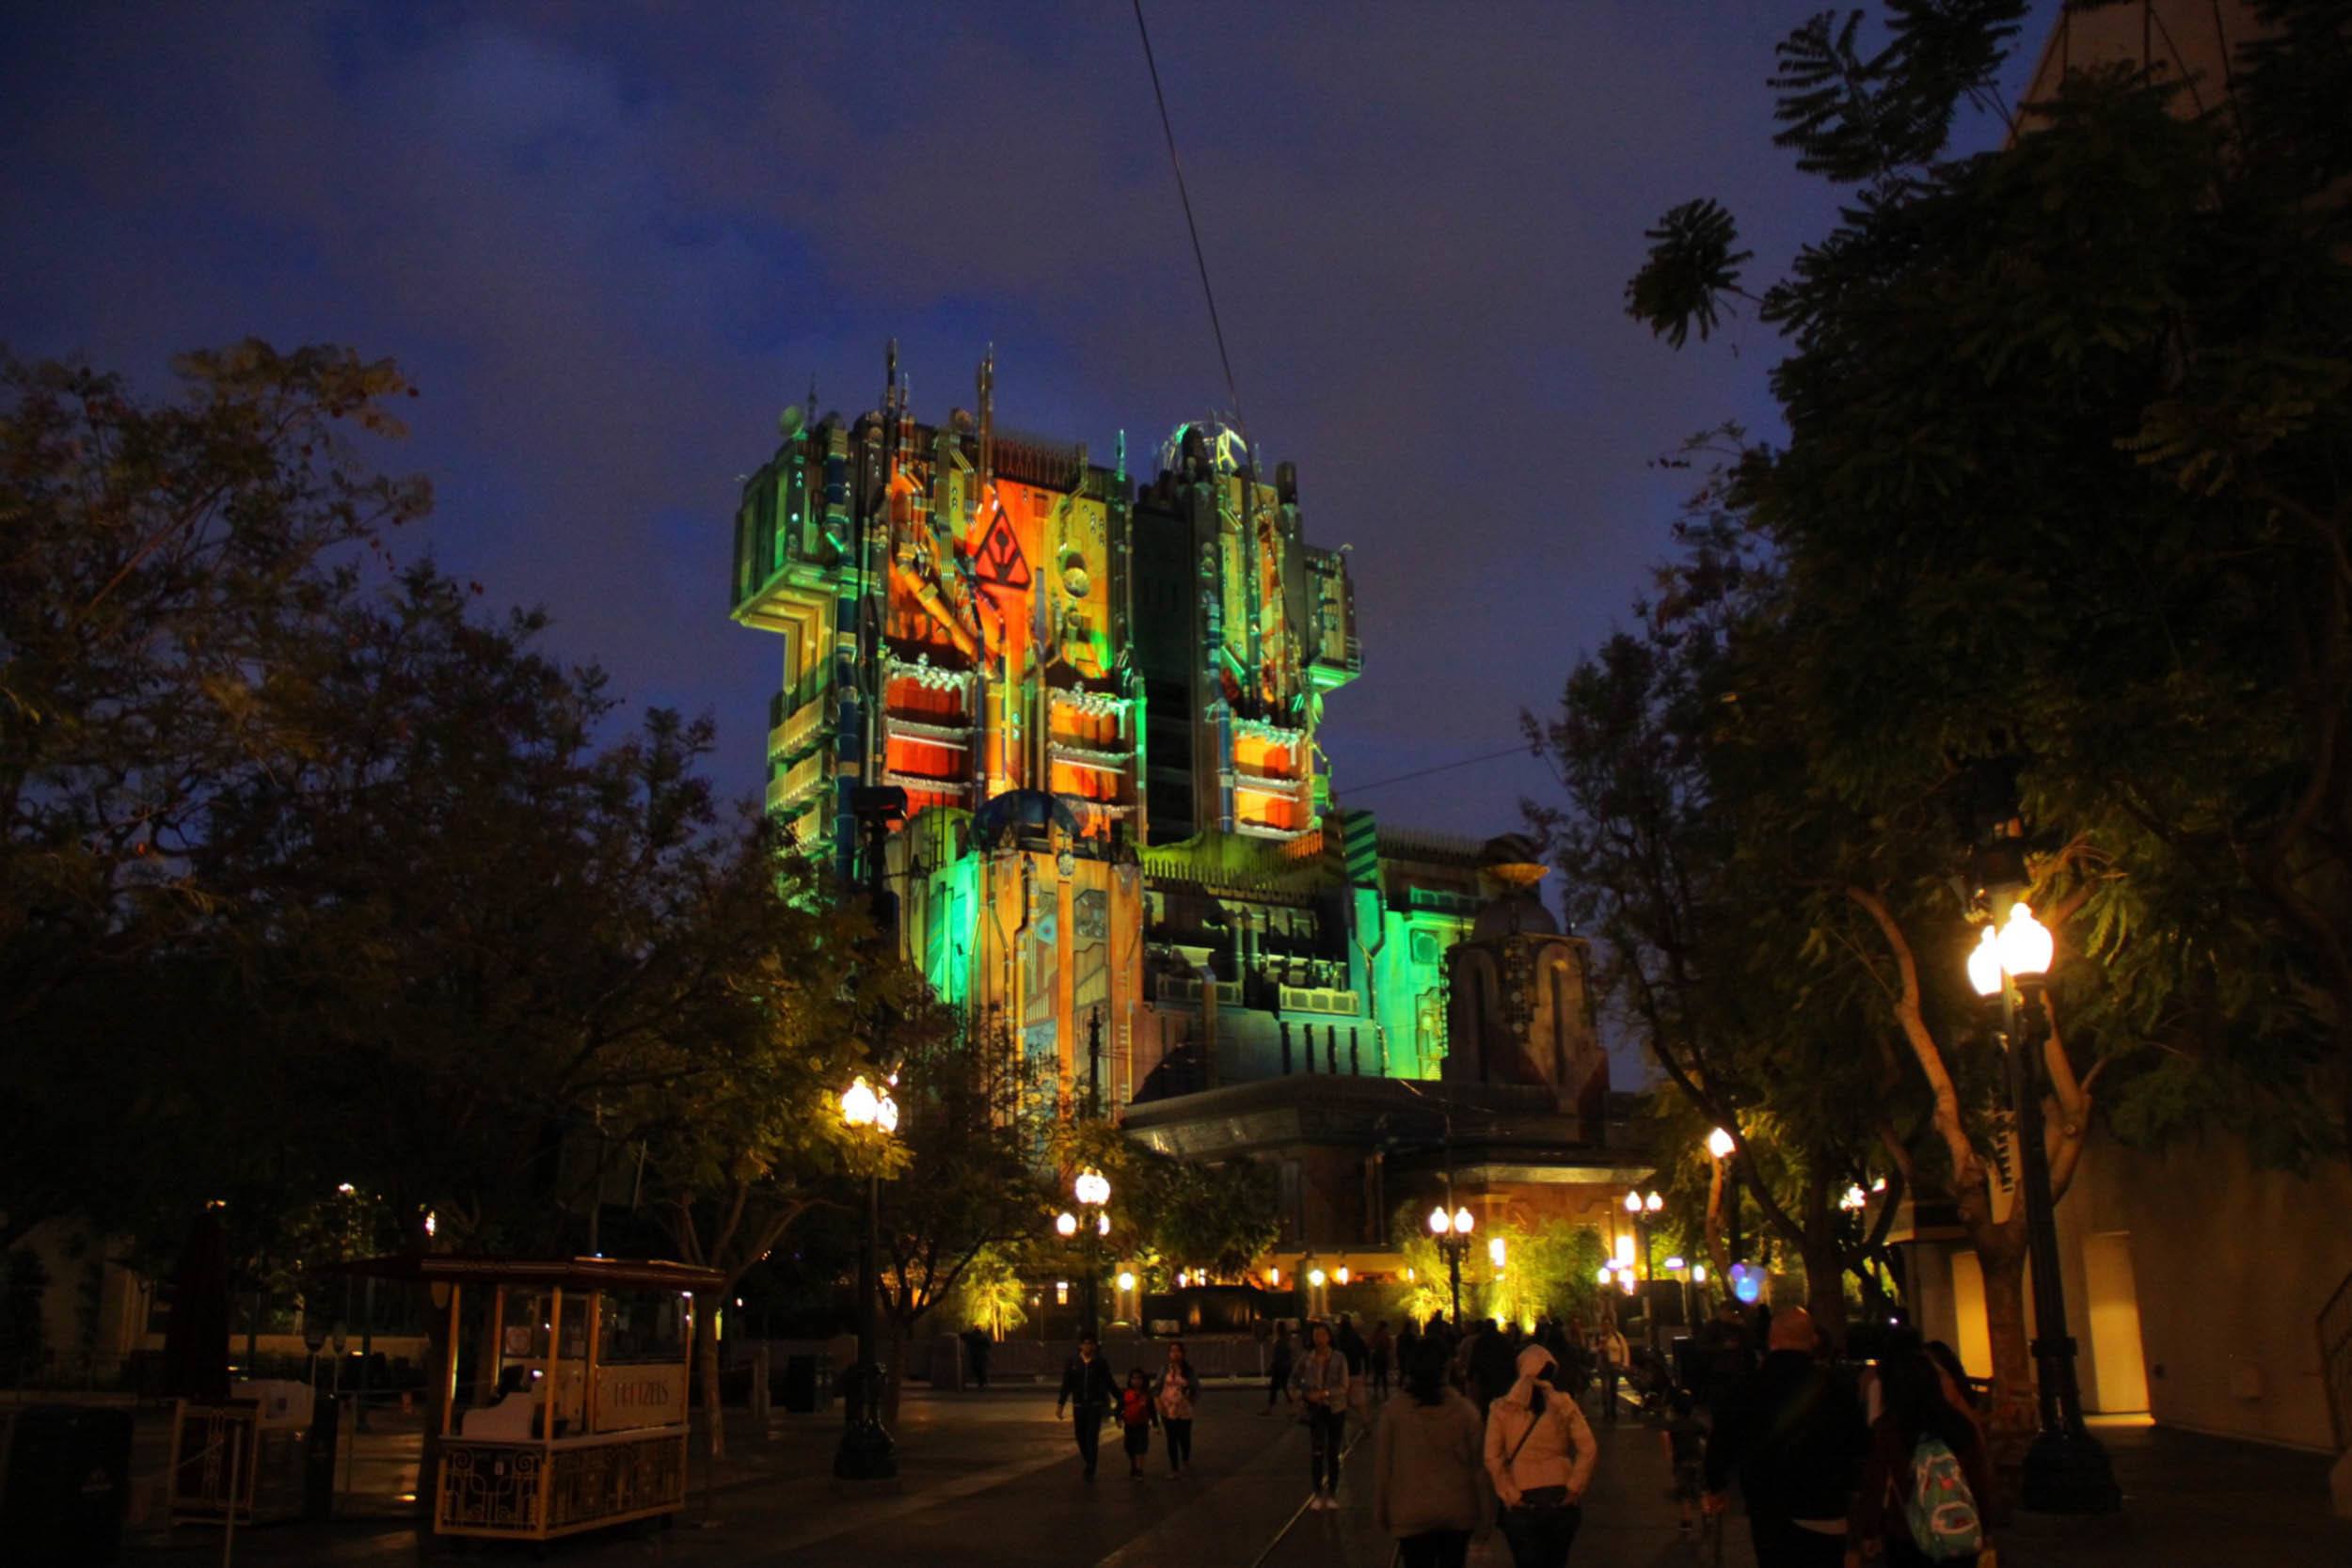 Guardians of the Galaxy – Mission: BREAKOUT! Comes Alive at Night!